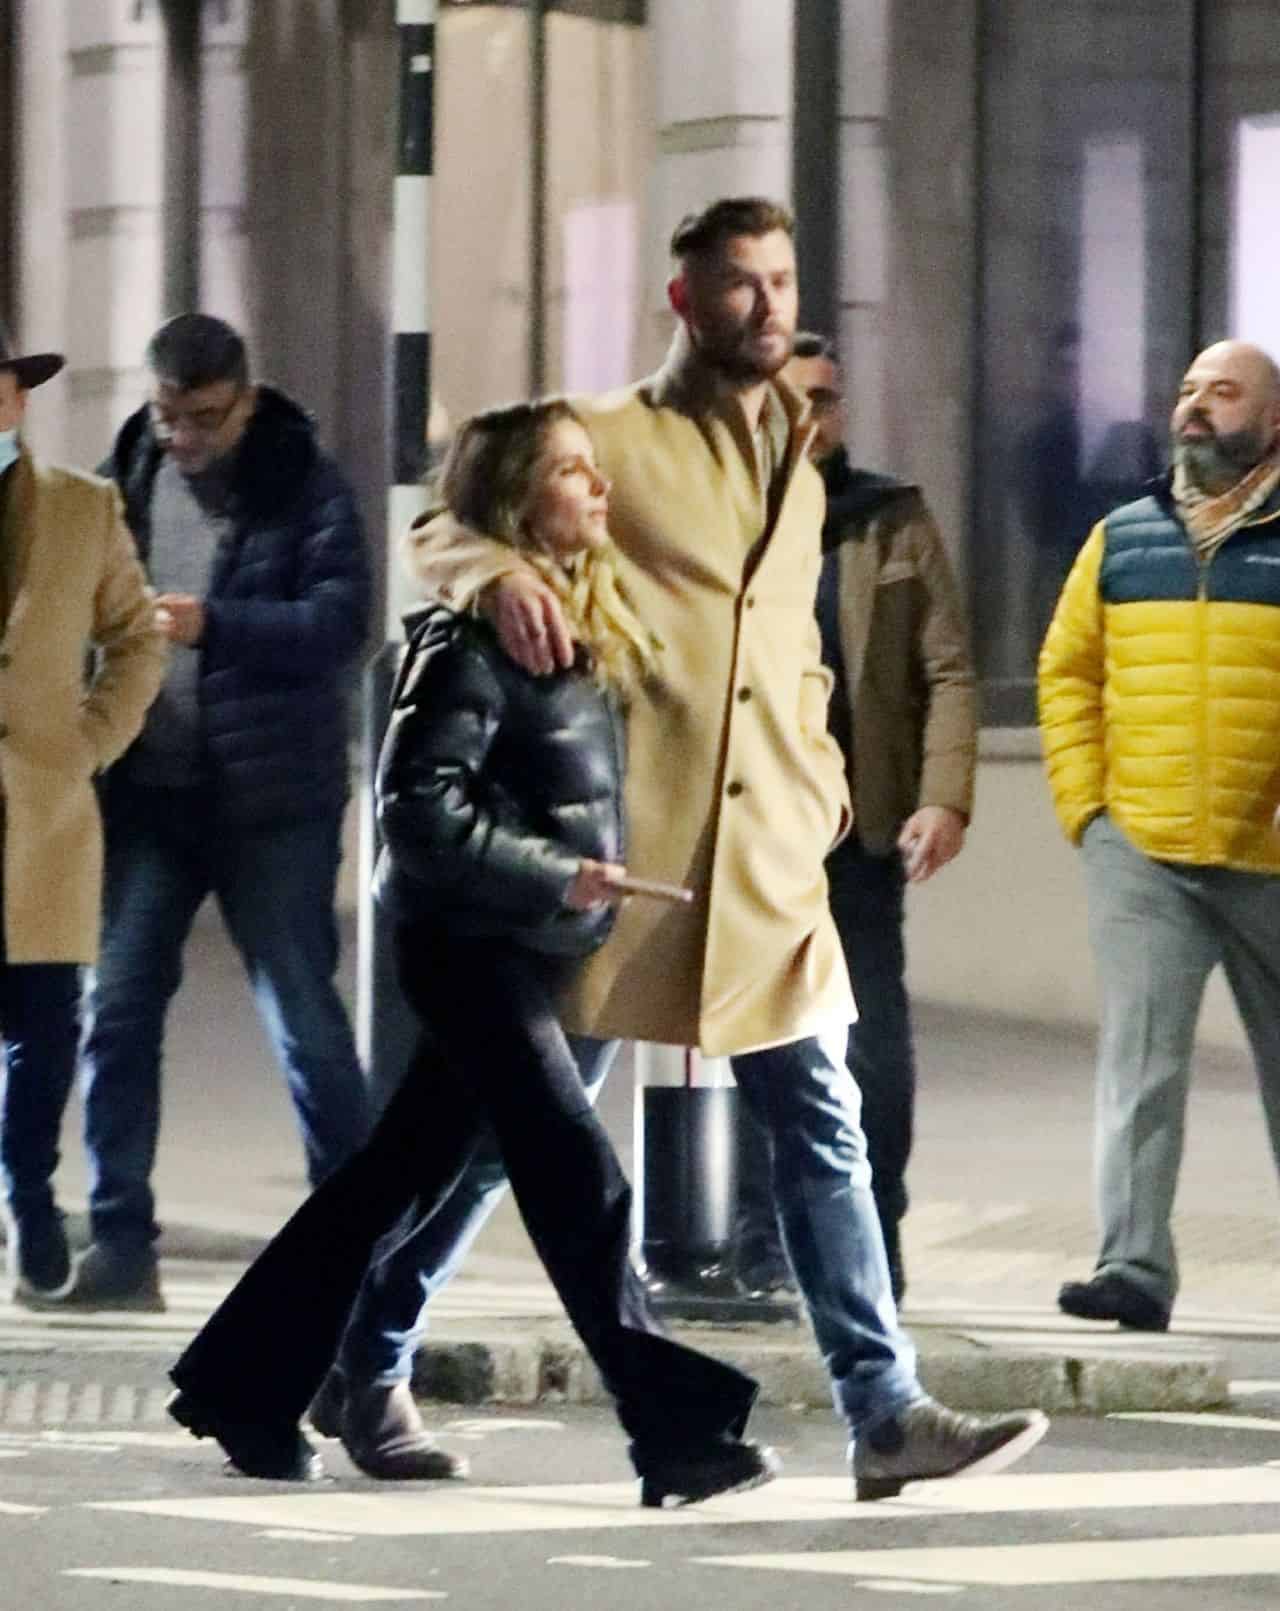 Elsa Pataky and Chris Hemsworth Go Out on a Casual Dinner Date in London